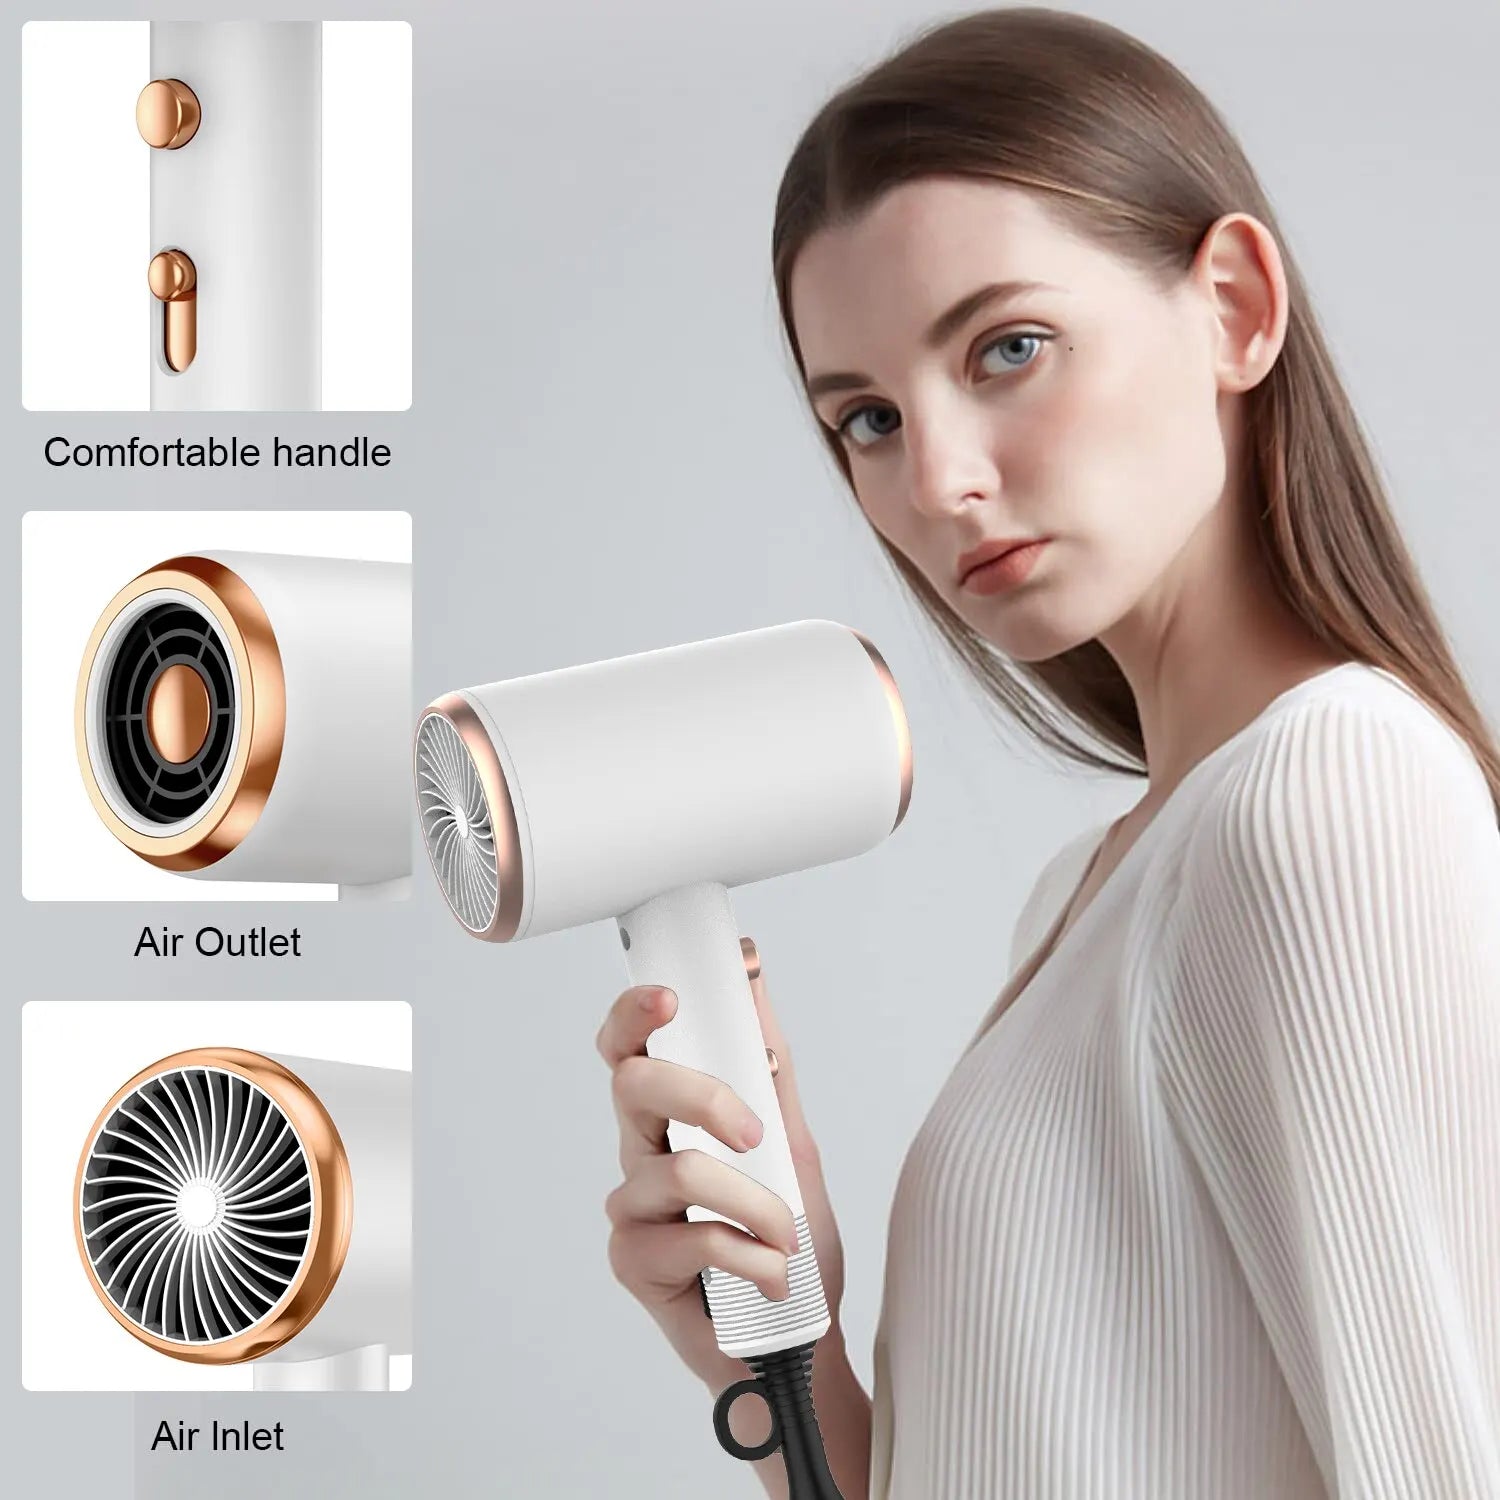 Professional Hair Dryer 1800W Powerful Ionic Hairdryer with Diffuser Blow Dryer with 2 Speeds 3 Heating and Cool Button for Wom